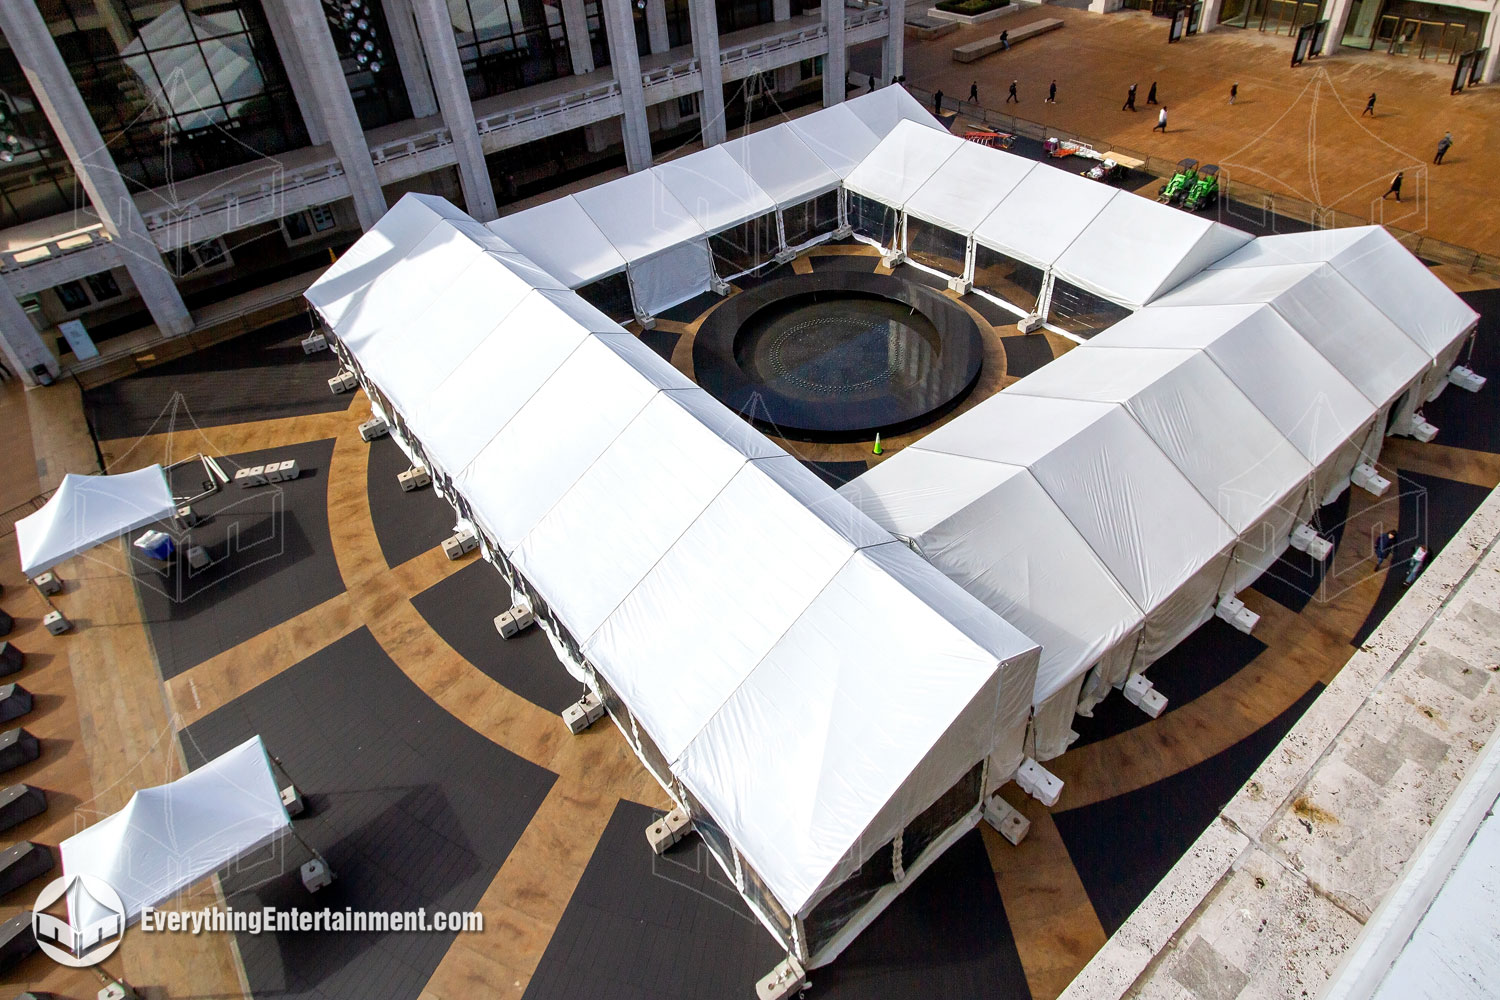 Multiple tents surround the fountain at Lincoln Center for the Dune Part II Movie Premiere in New York City.